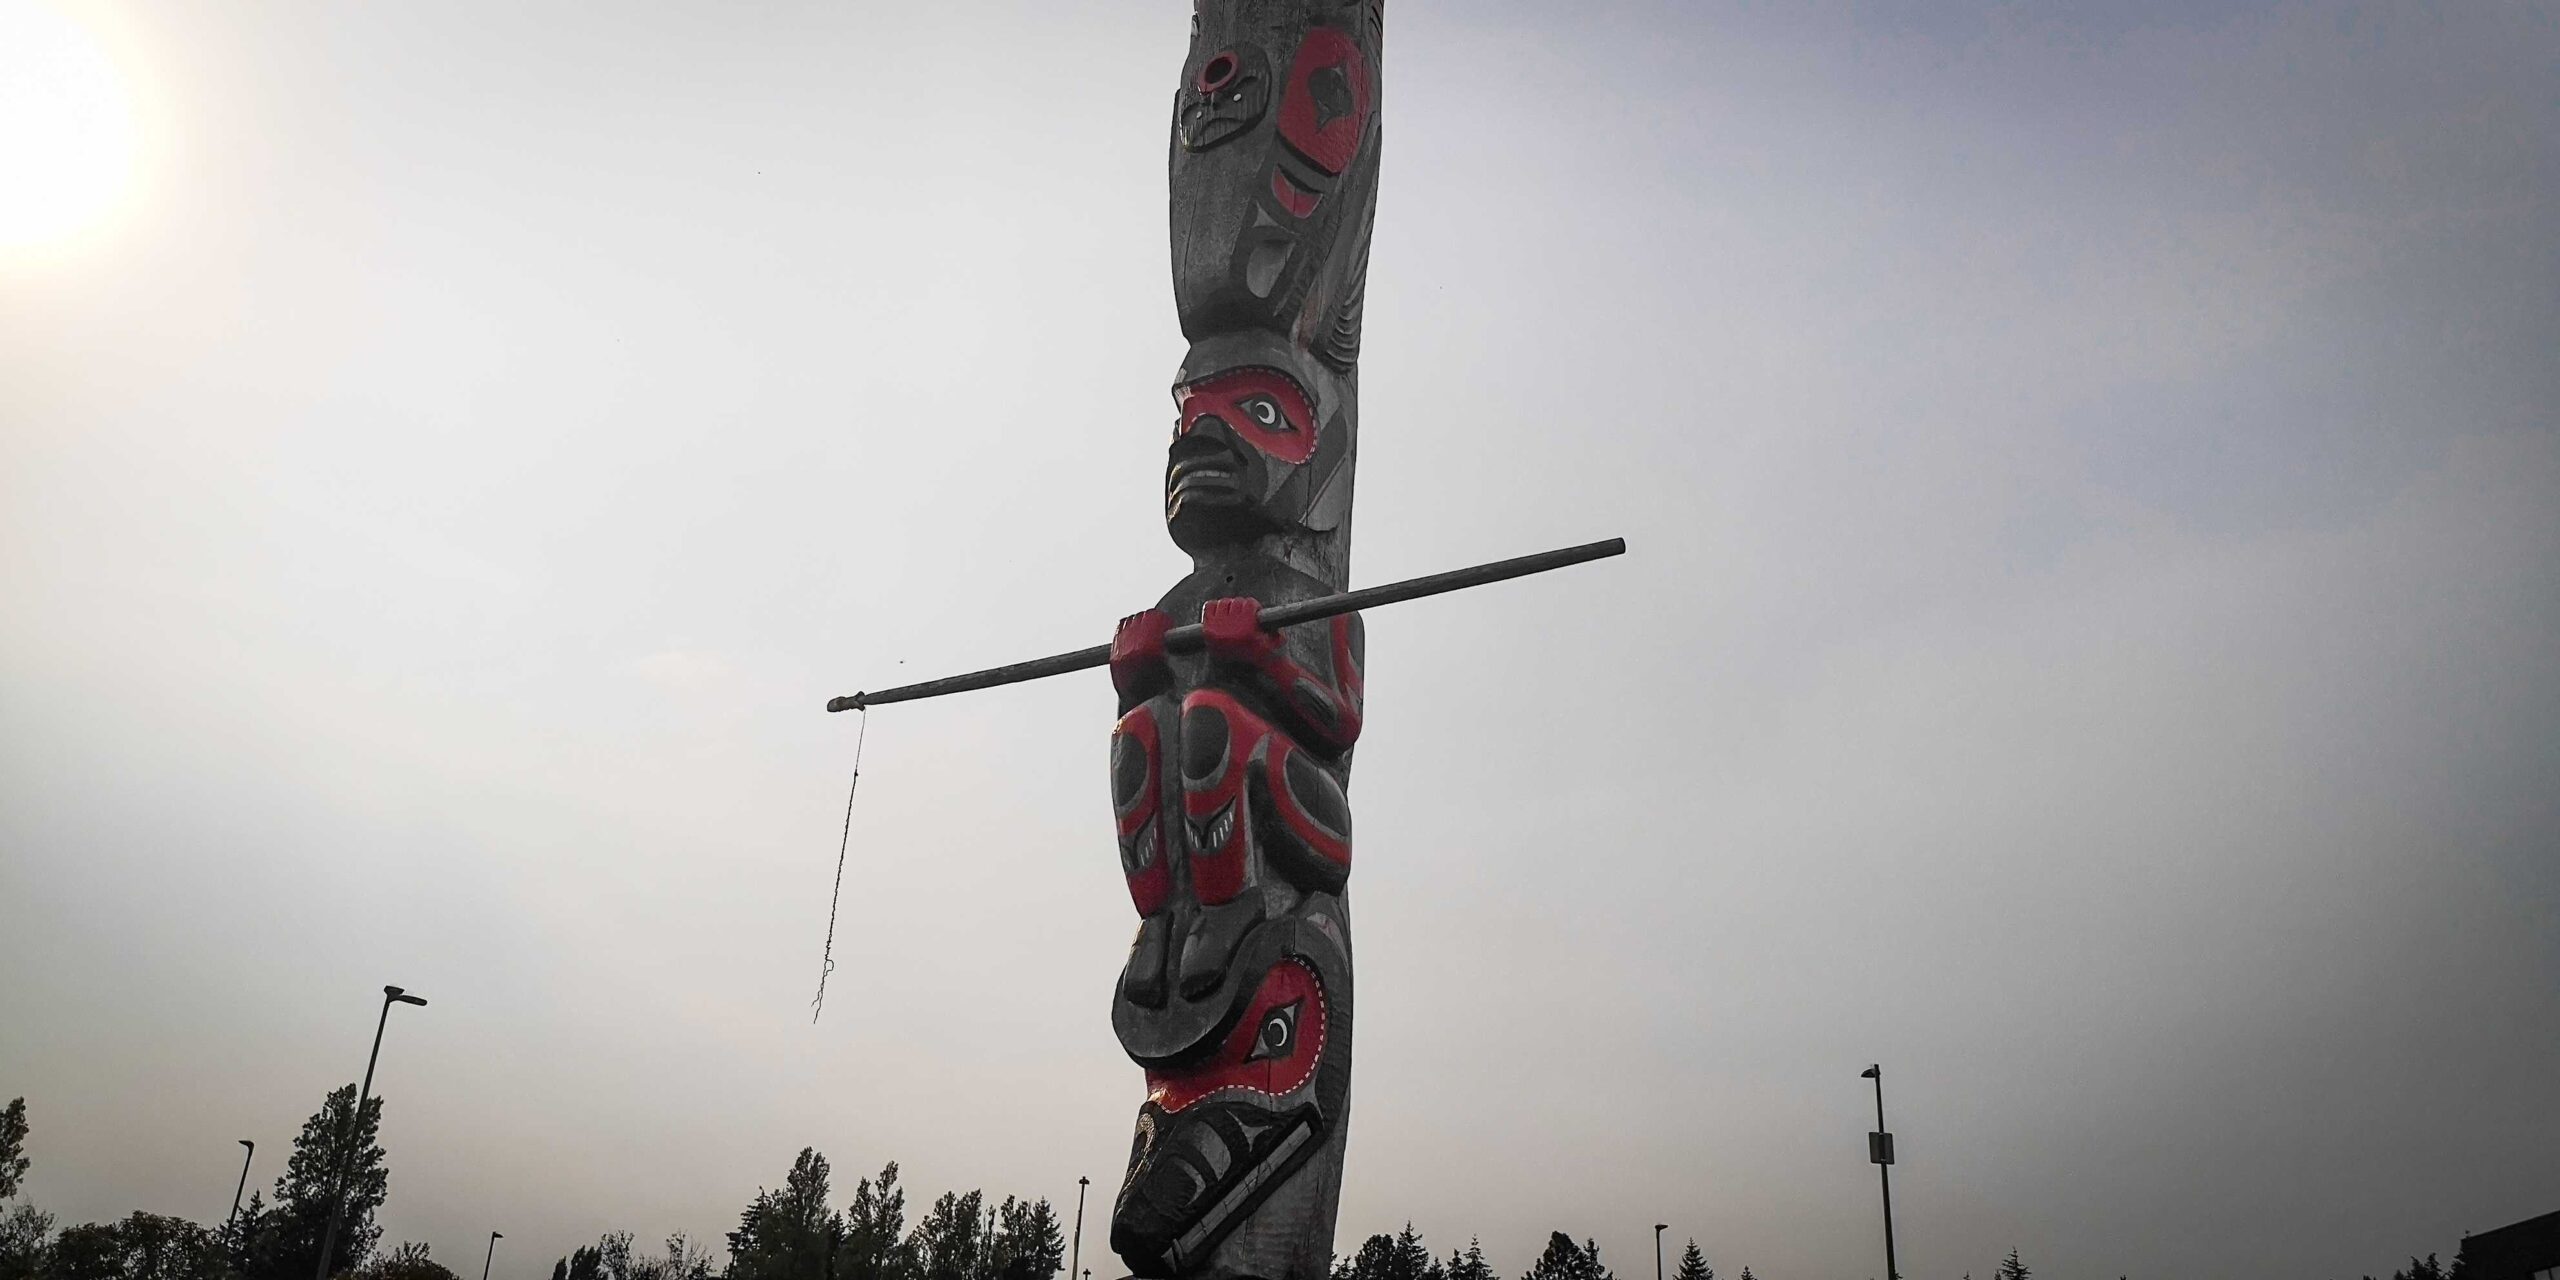 The photo frames Heeshka a tlaquiaht, a whaler who is holding a wooden harpoon. The pole is brown with red and black designs which shape the images